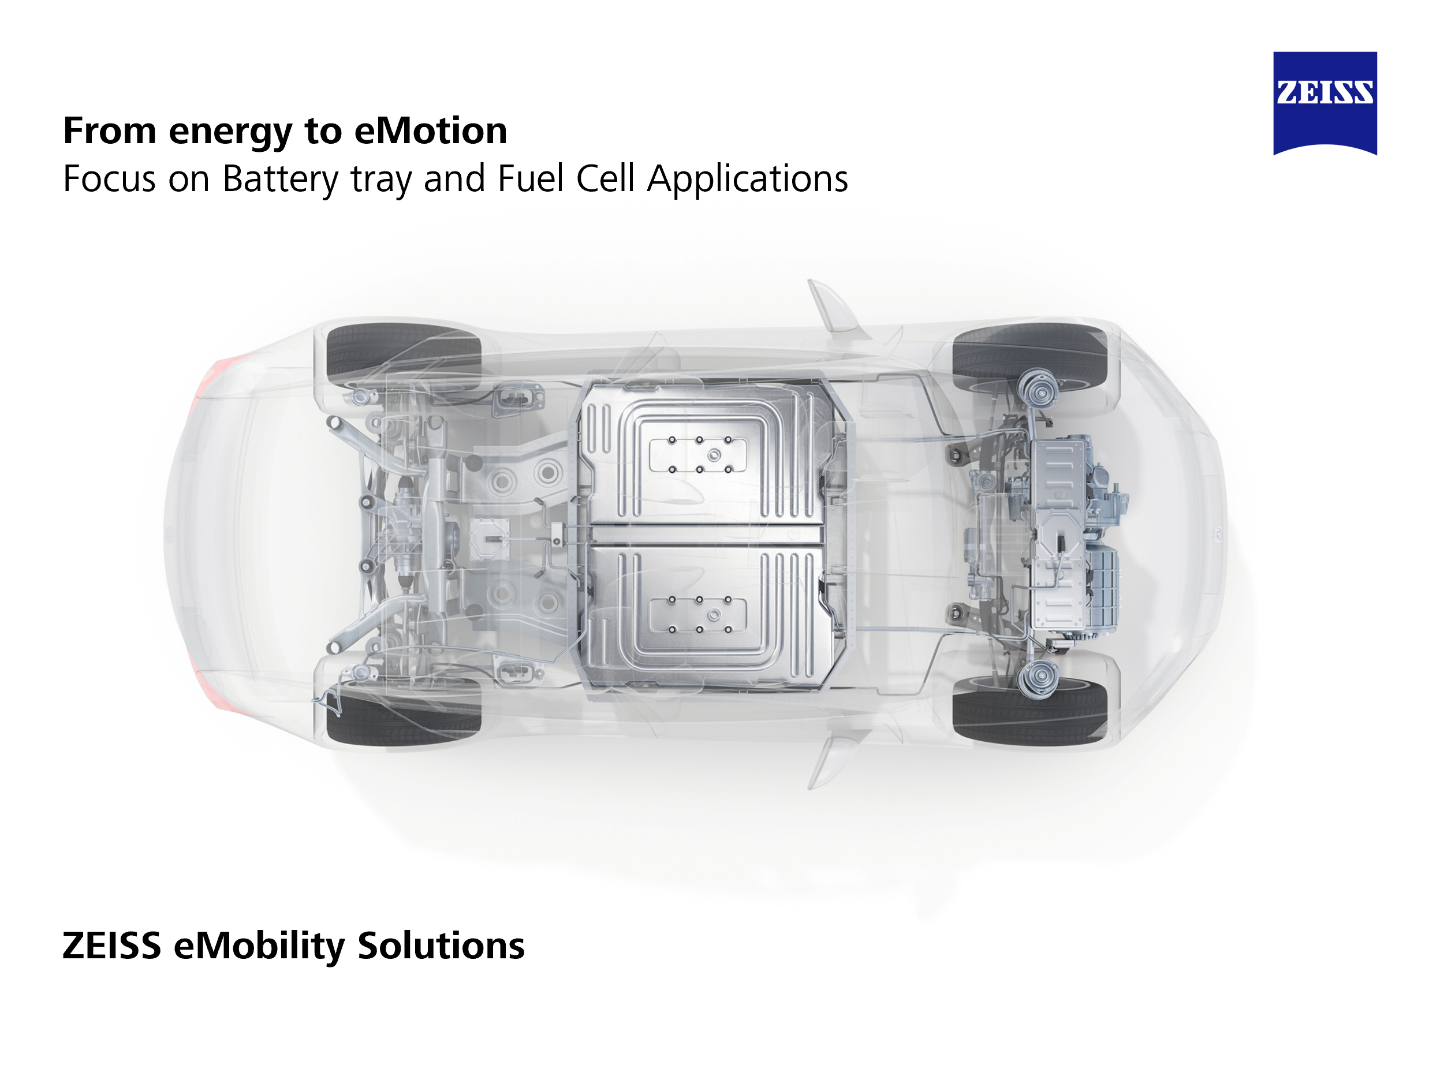 https://e-vehicleinfo.com/how-lithium-ion-cell-inspection-can-improve-battery-performance/